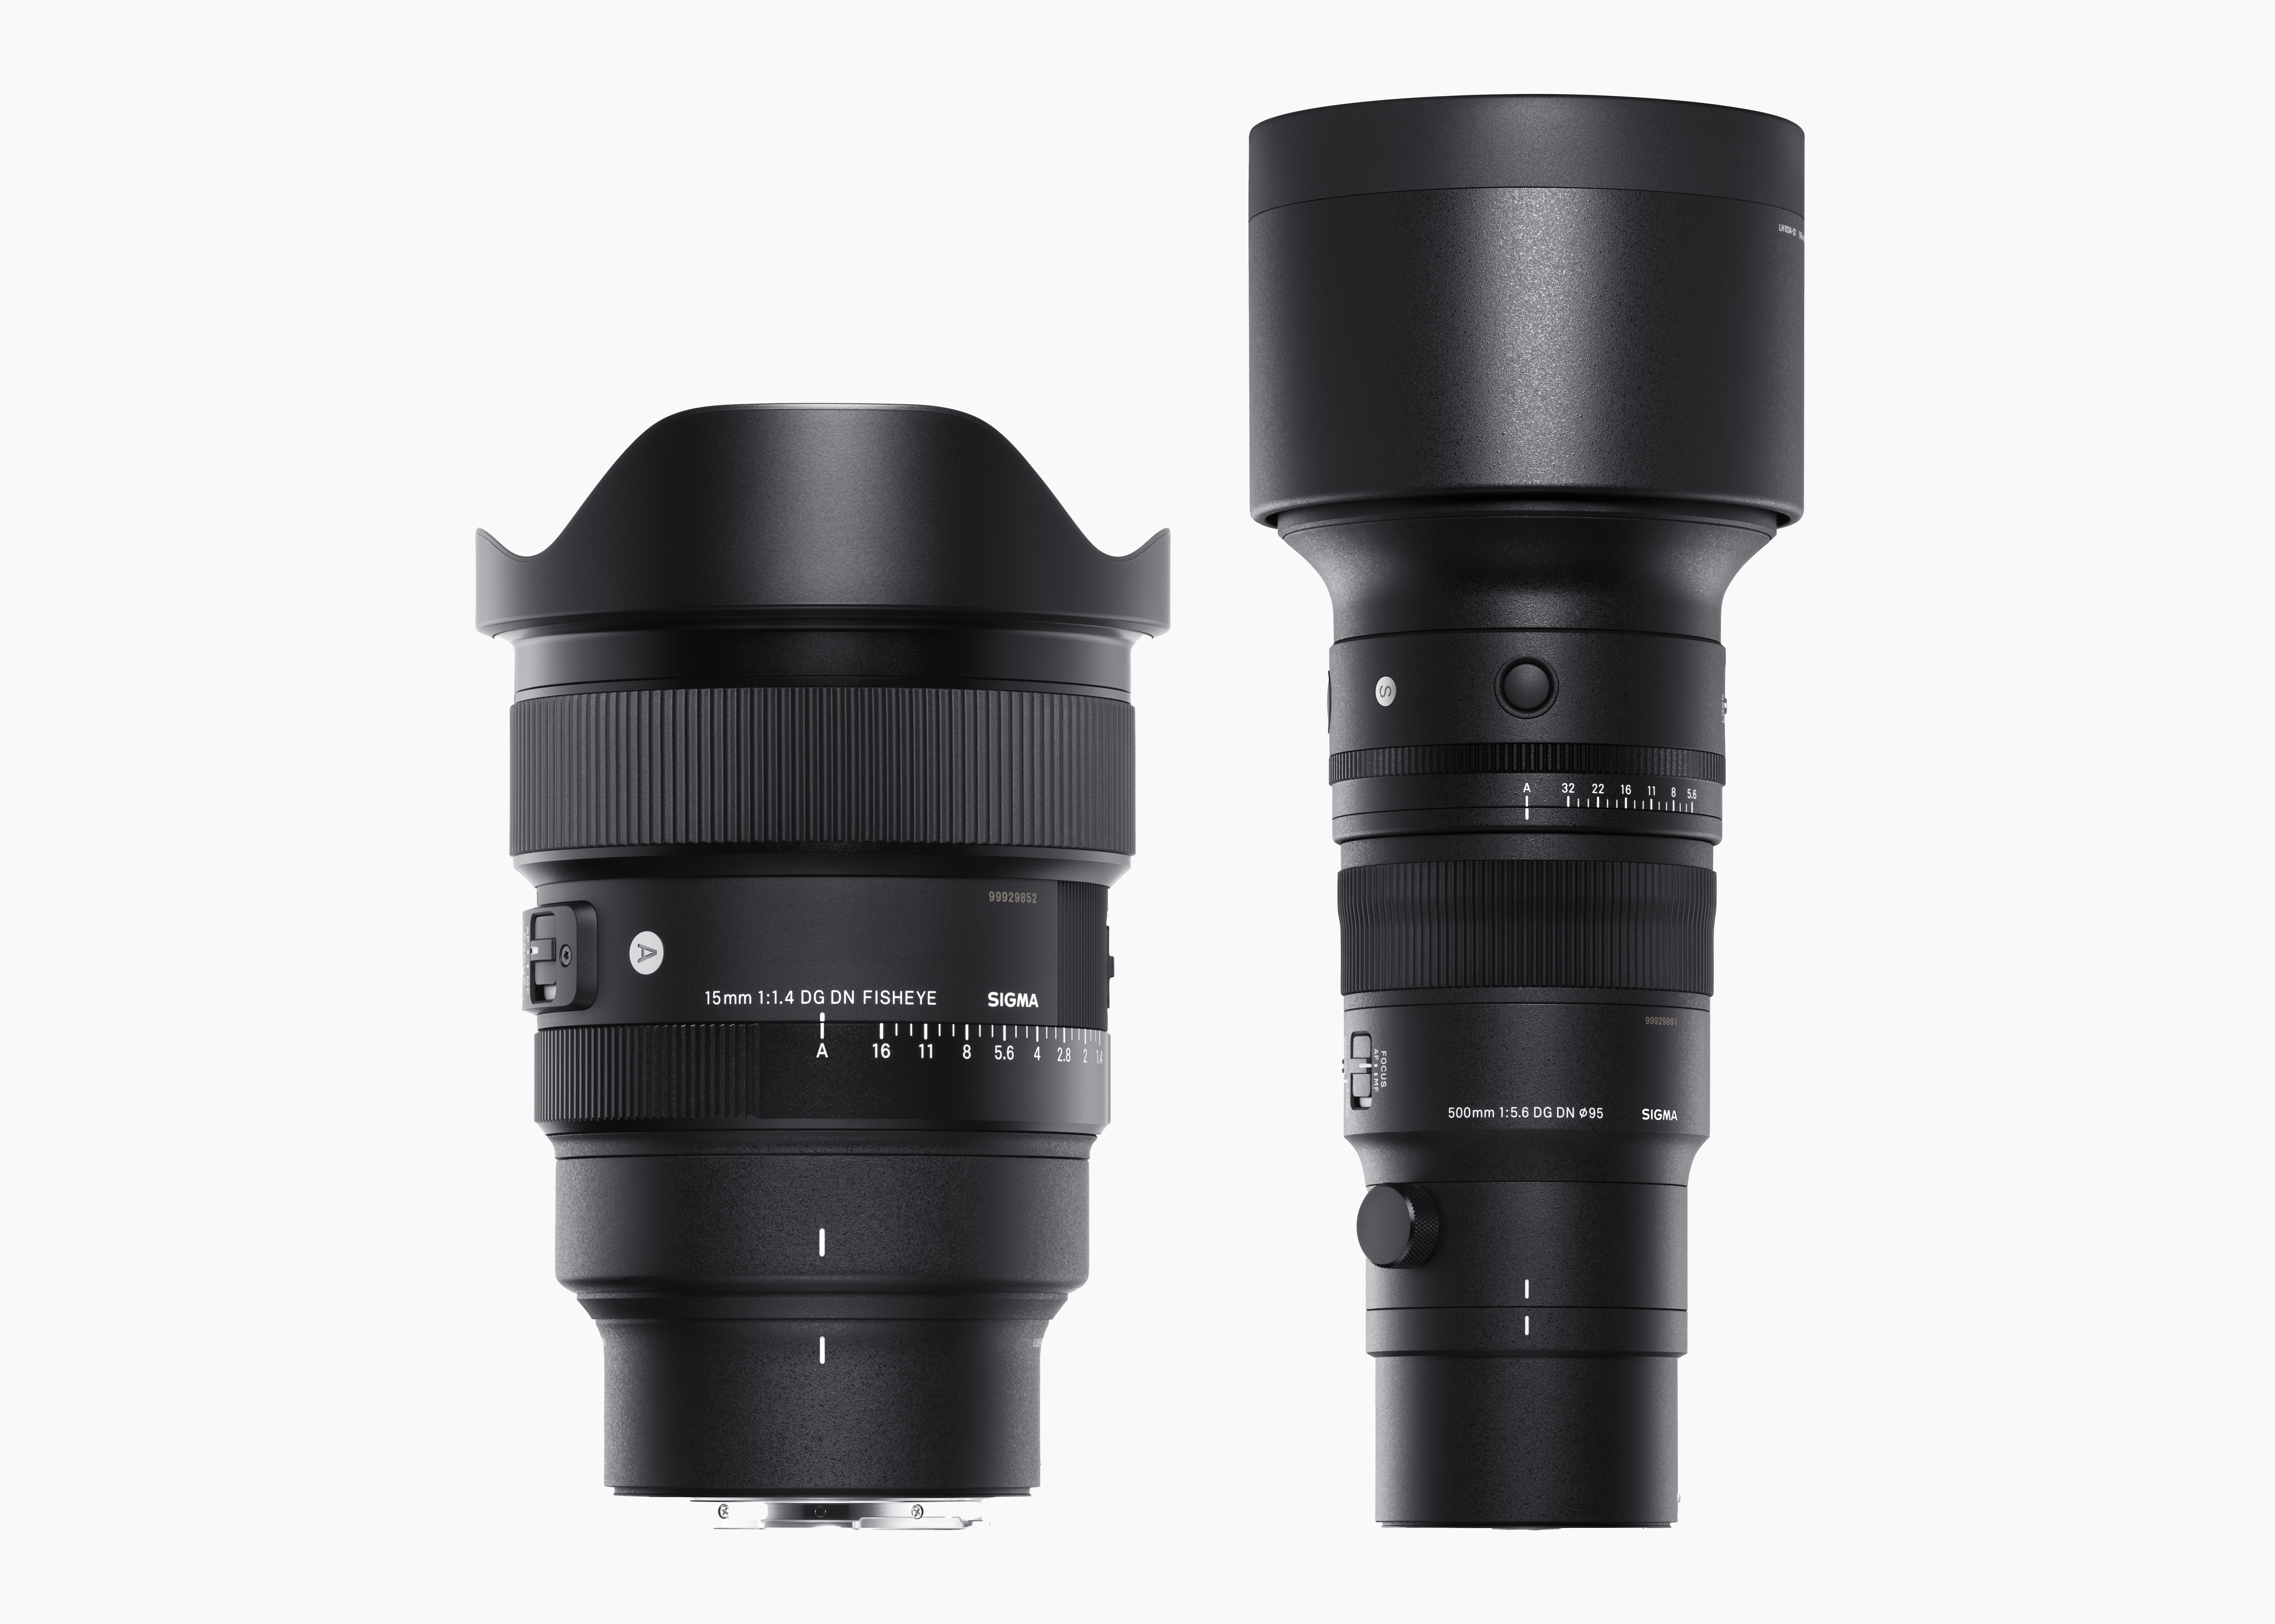 NEW SIGMA 15mm F1.4 DG DN and SIGMA 500mm F5.6 14